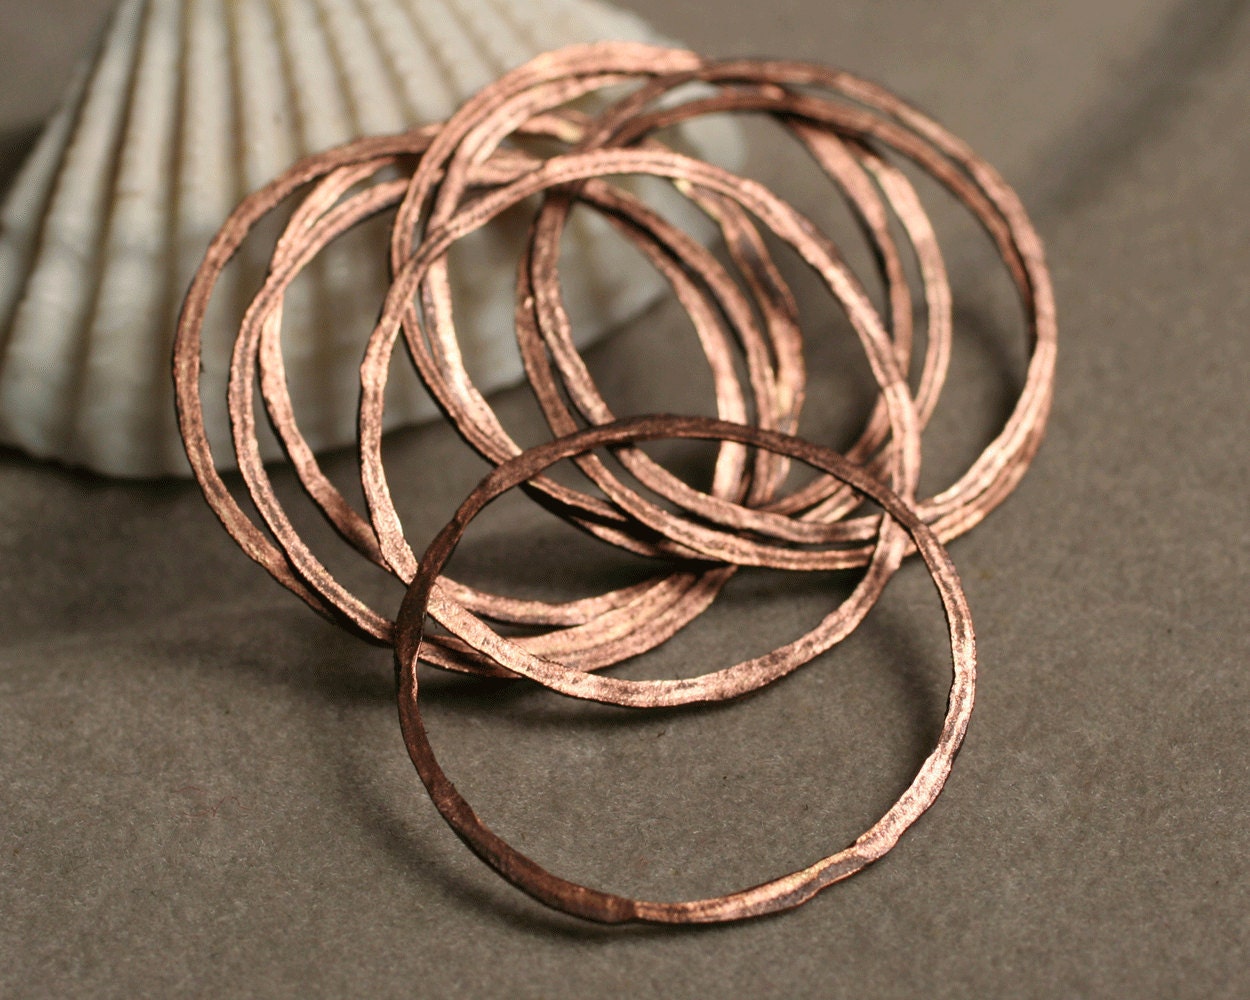 Hand hammered antique copper ring aprox 24mm in diameter, 8 pcs (item ID ACOR20K)